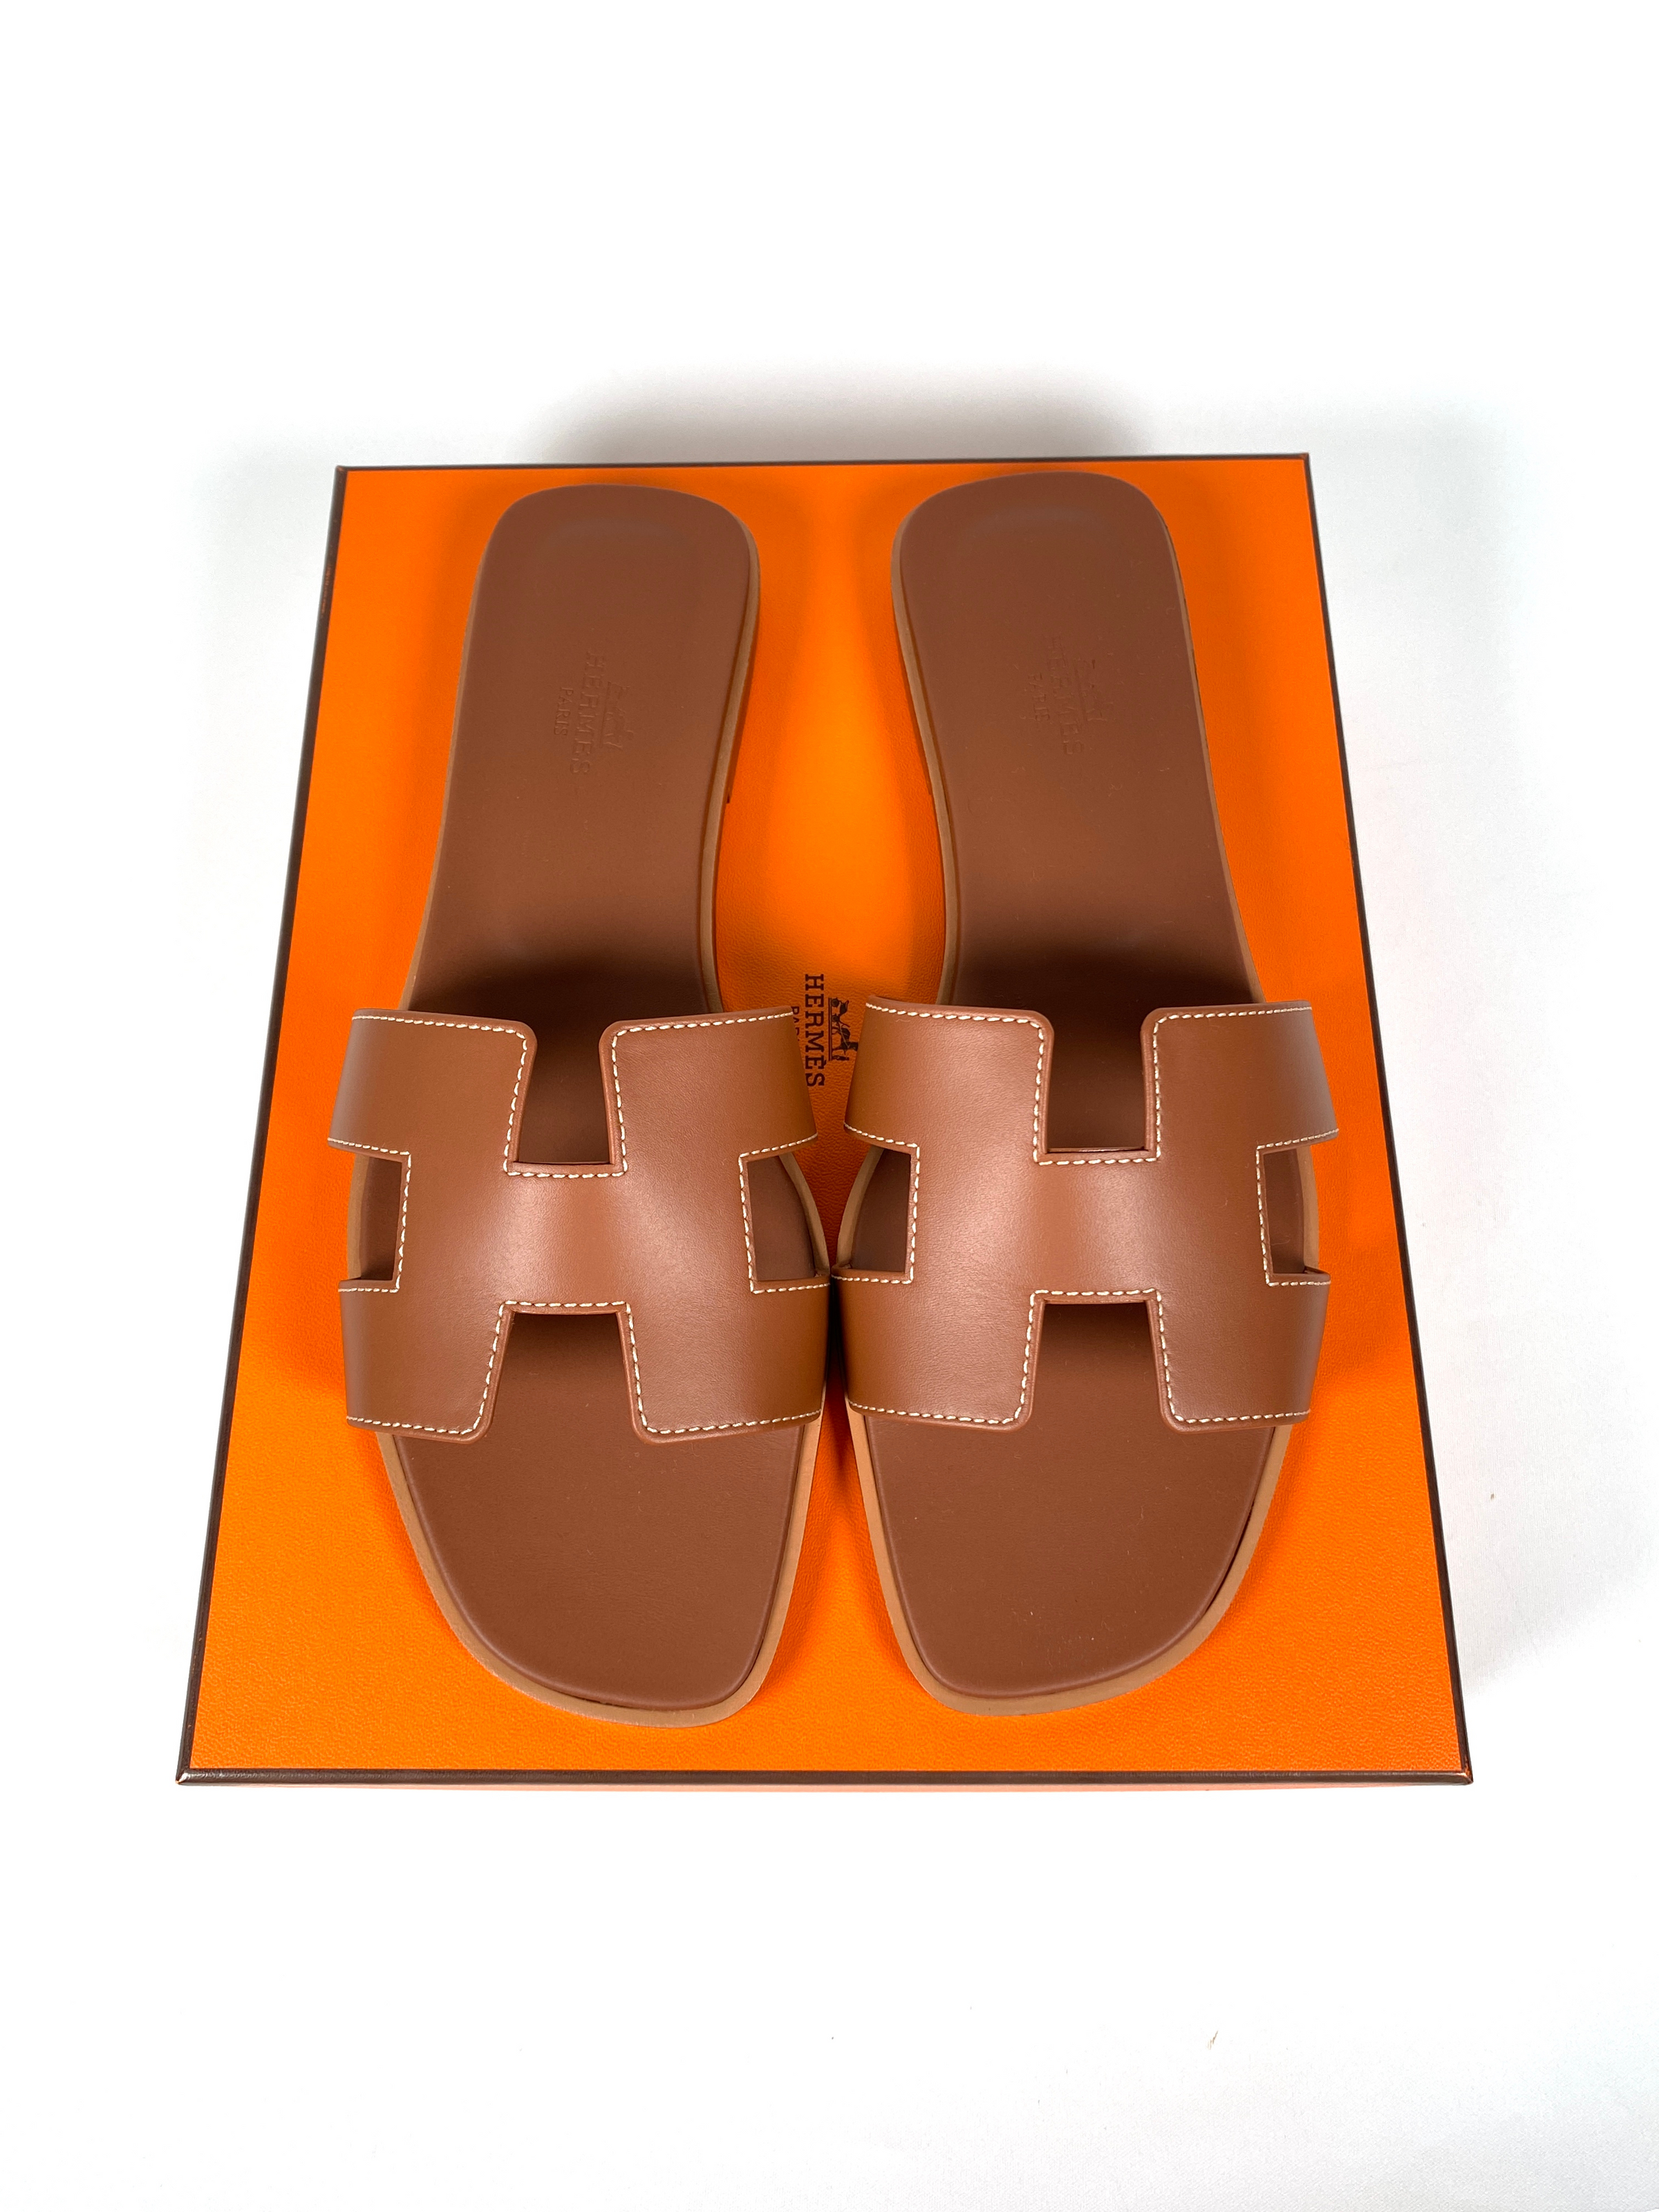 HERMES - ORAN SANDALS IN TAN LEATHER - SZ 39.5 - NEW IN BOX – RE.LUXE AU